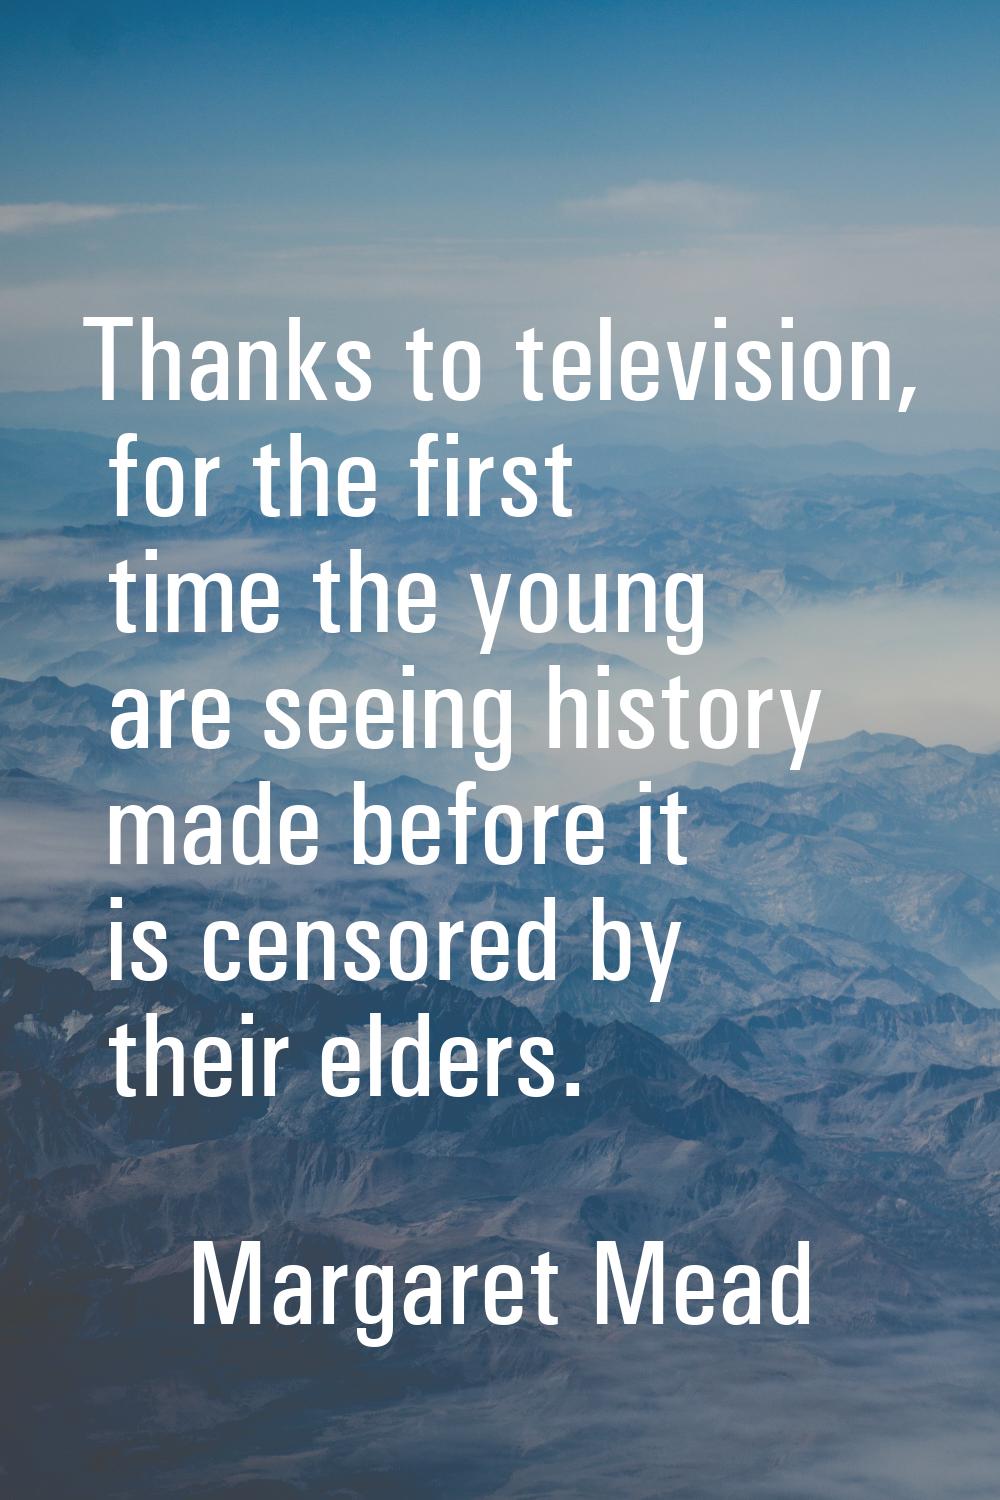 Thanks to television, for the first time the young are seeing history made before it is censored by